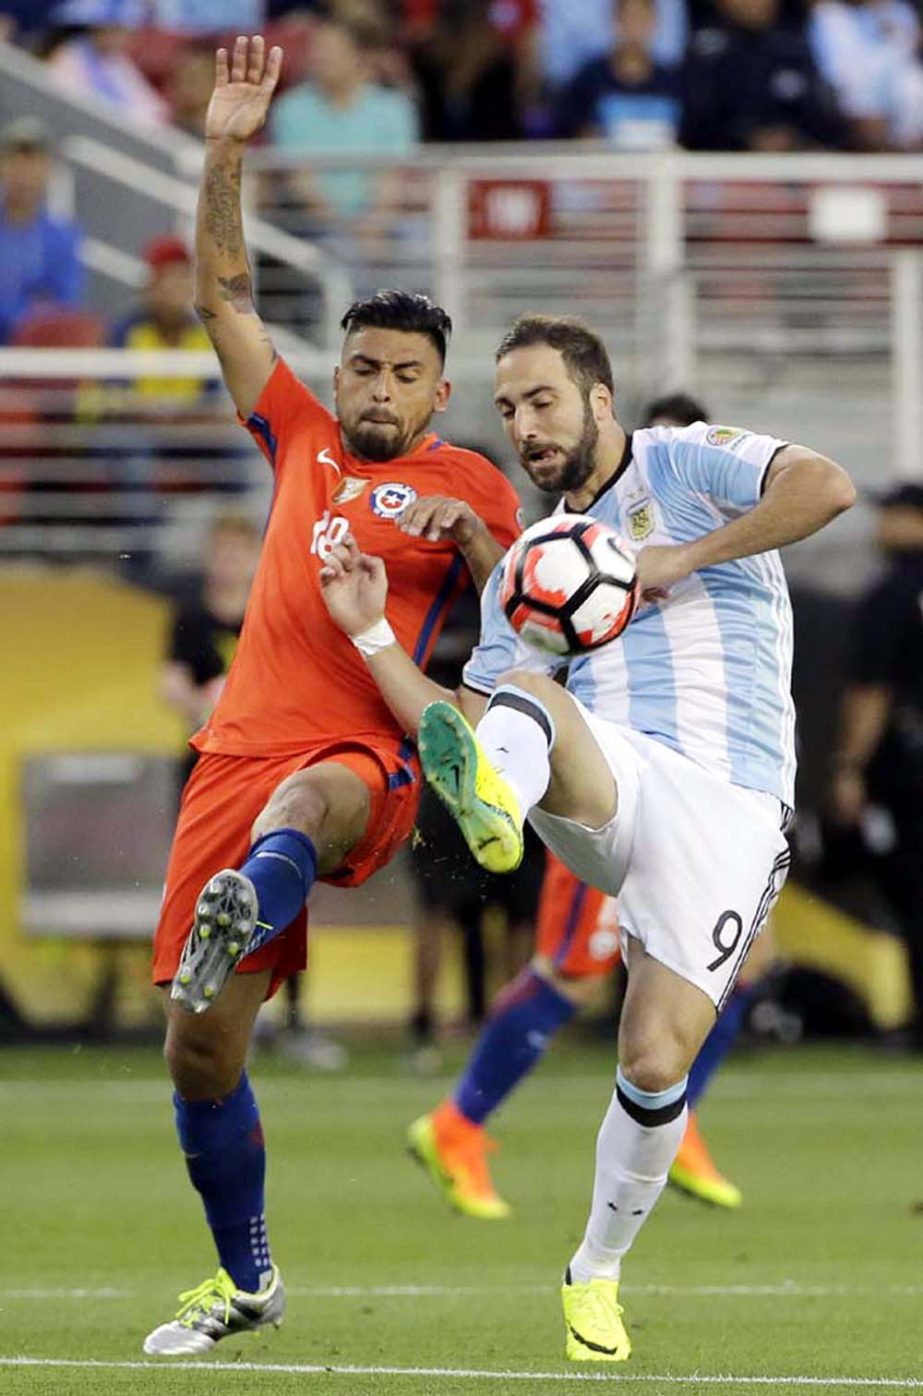 Argentinaâ€™s Gonzalo Higuain (right) and Chileâ€™s Gonzalo Jara fight for the ball during a Copa America Centenario Group A soccer match at Levi's Stadium in Santa Clara, Calif on Monday.